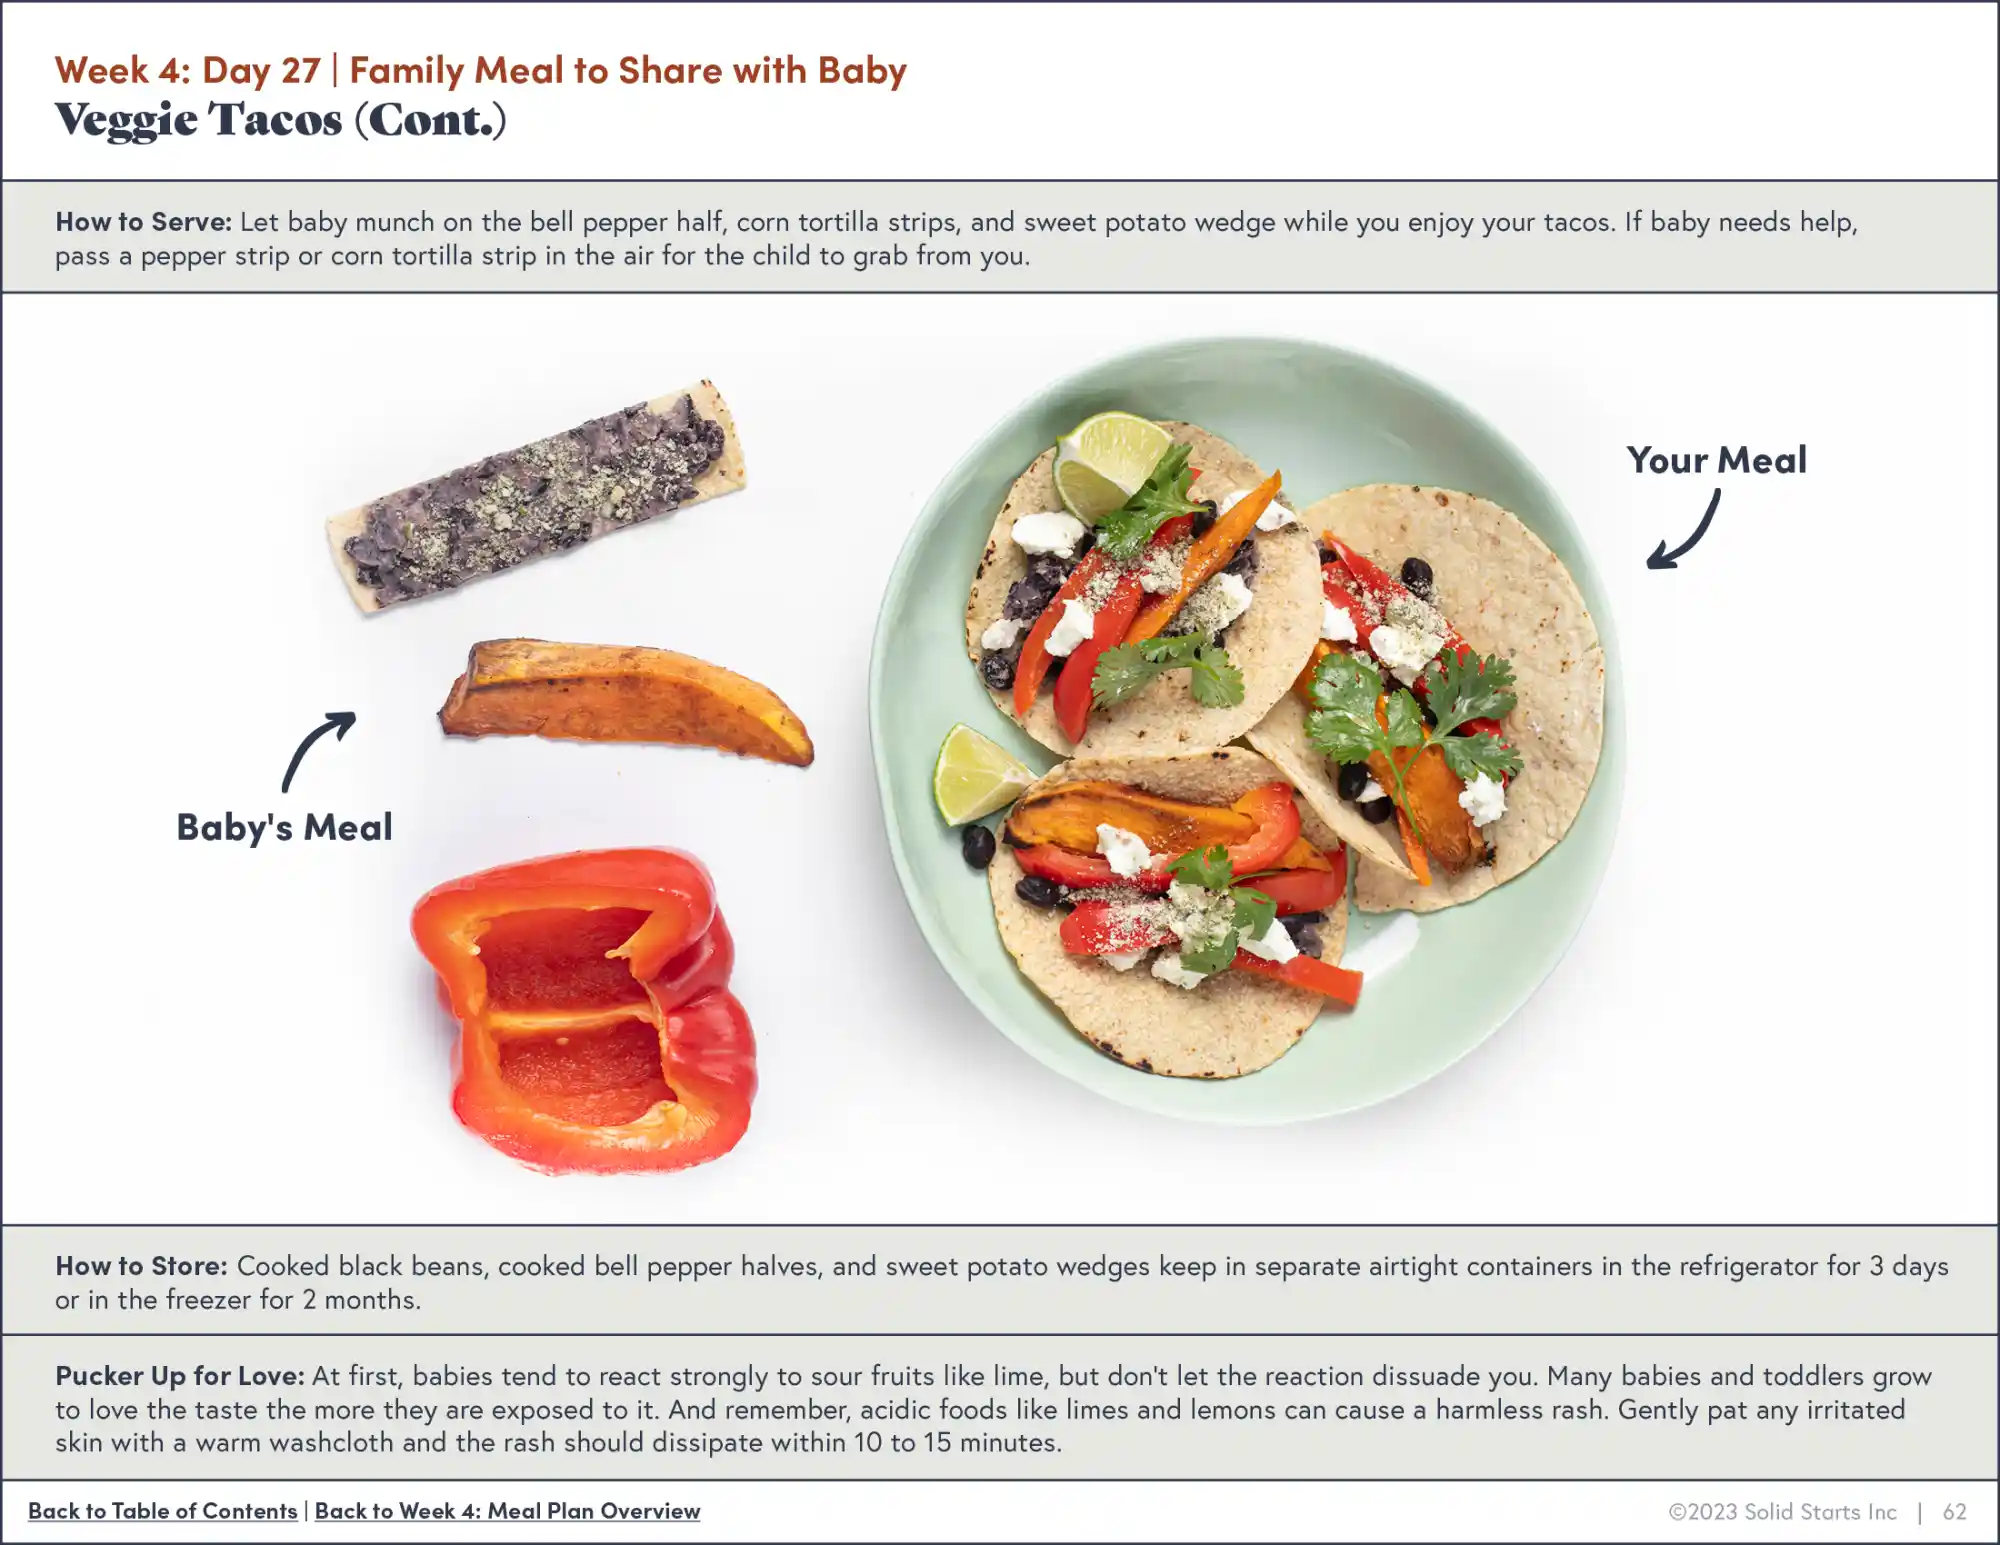 Sample recipe from 100 day plan